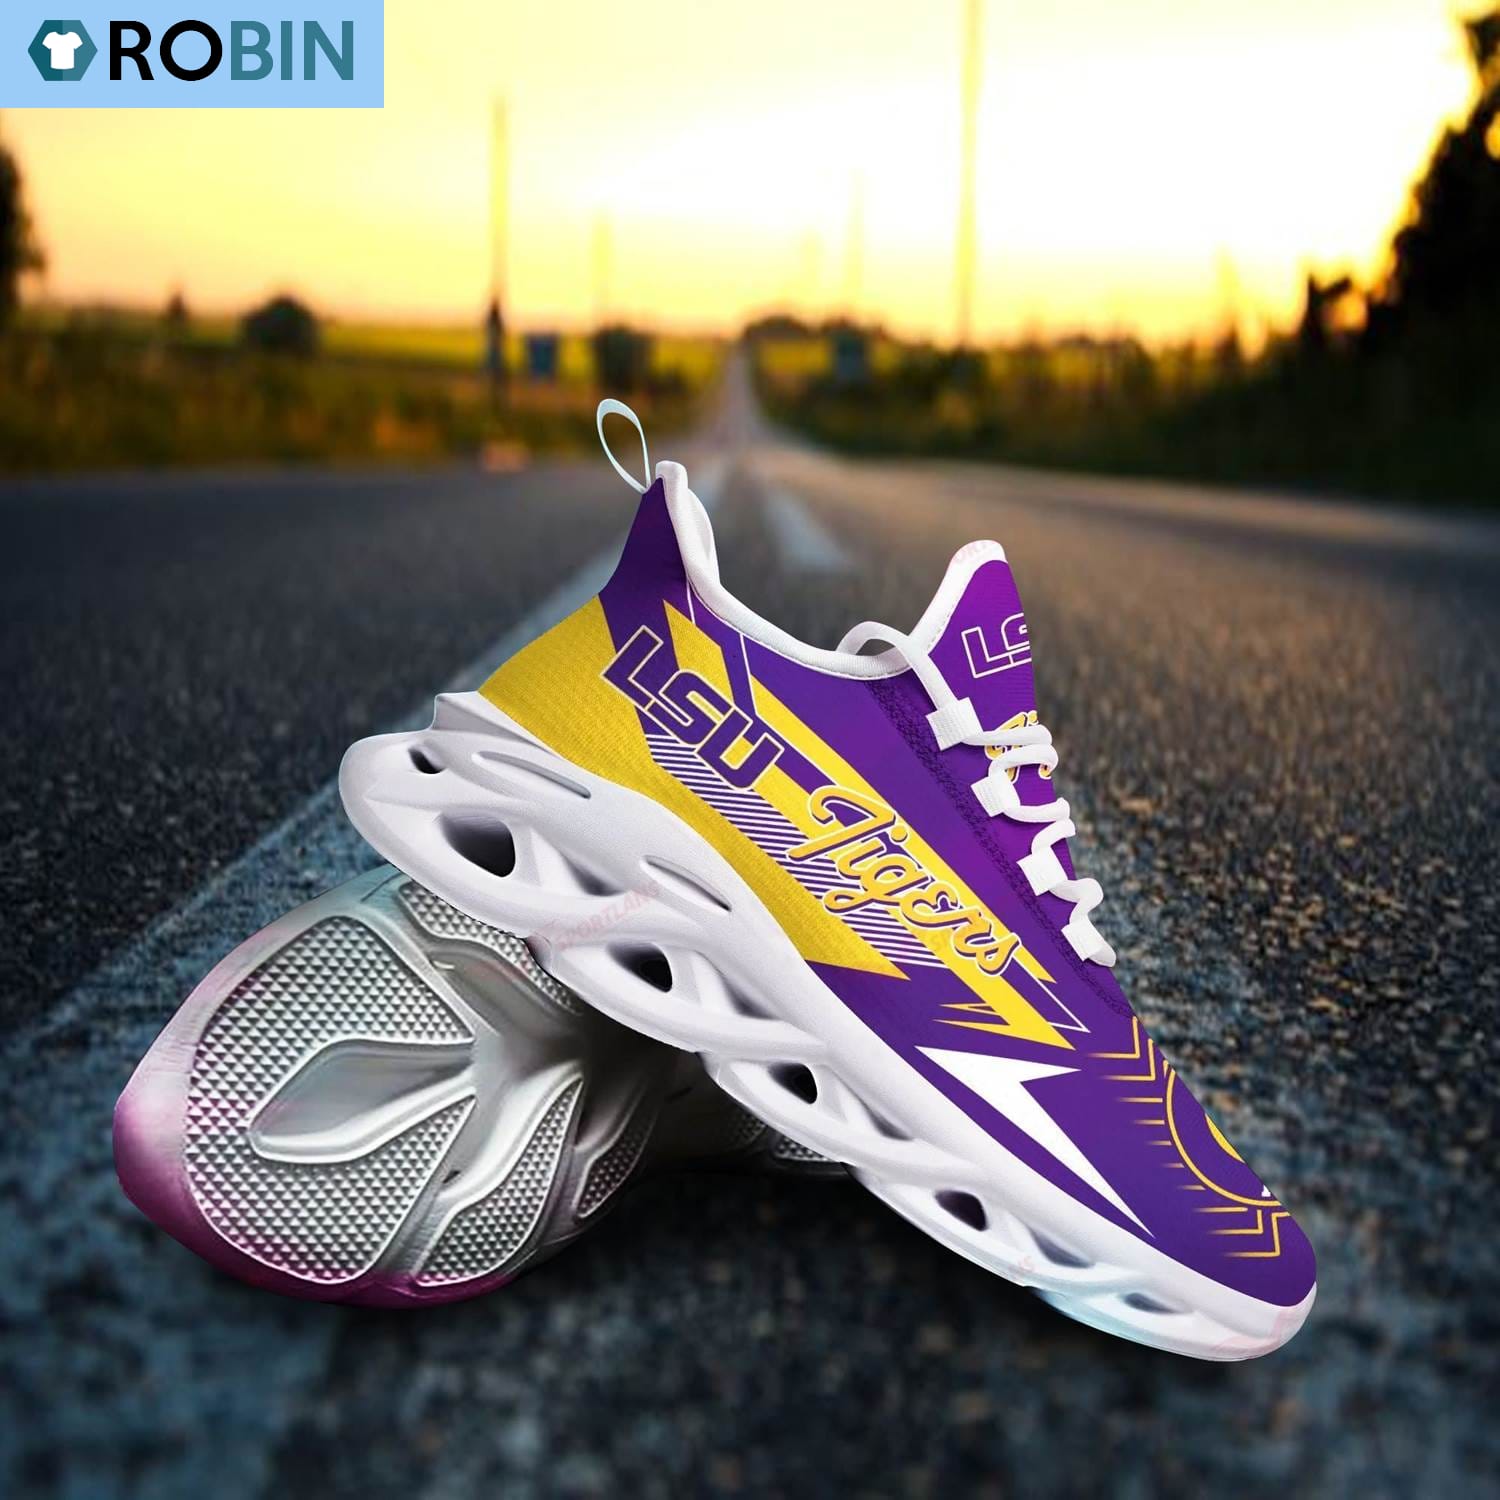 LSU TIGERS Chunky Sneakers, NCAA Sneakers Gift For Fans